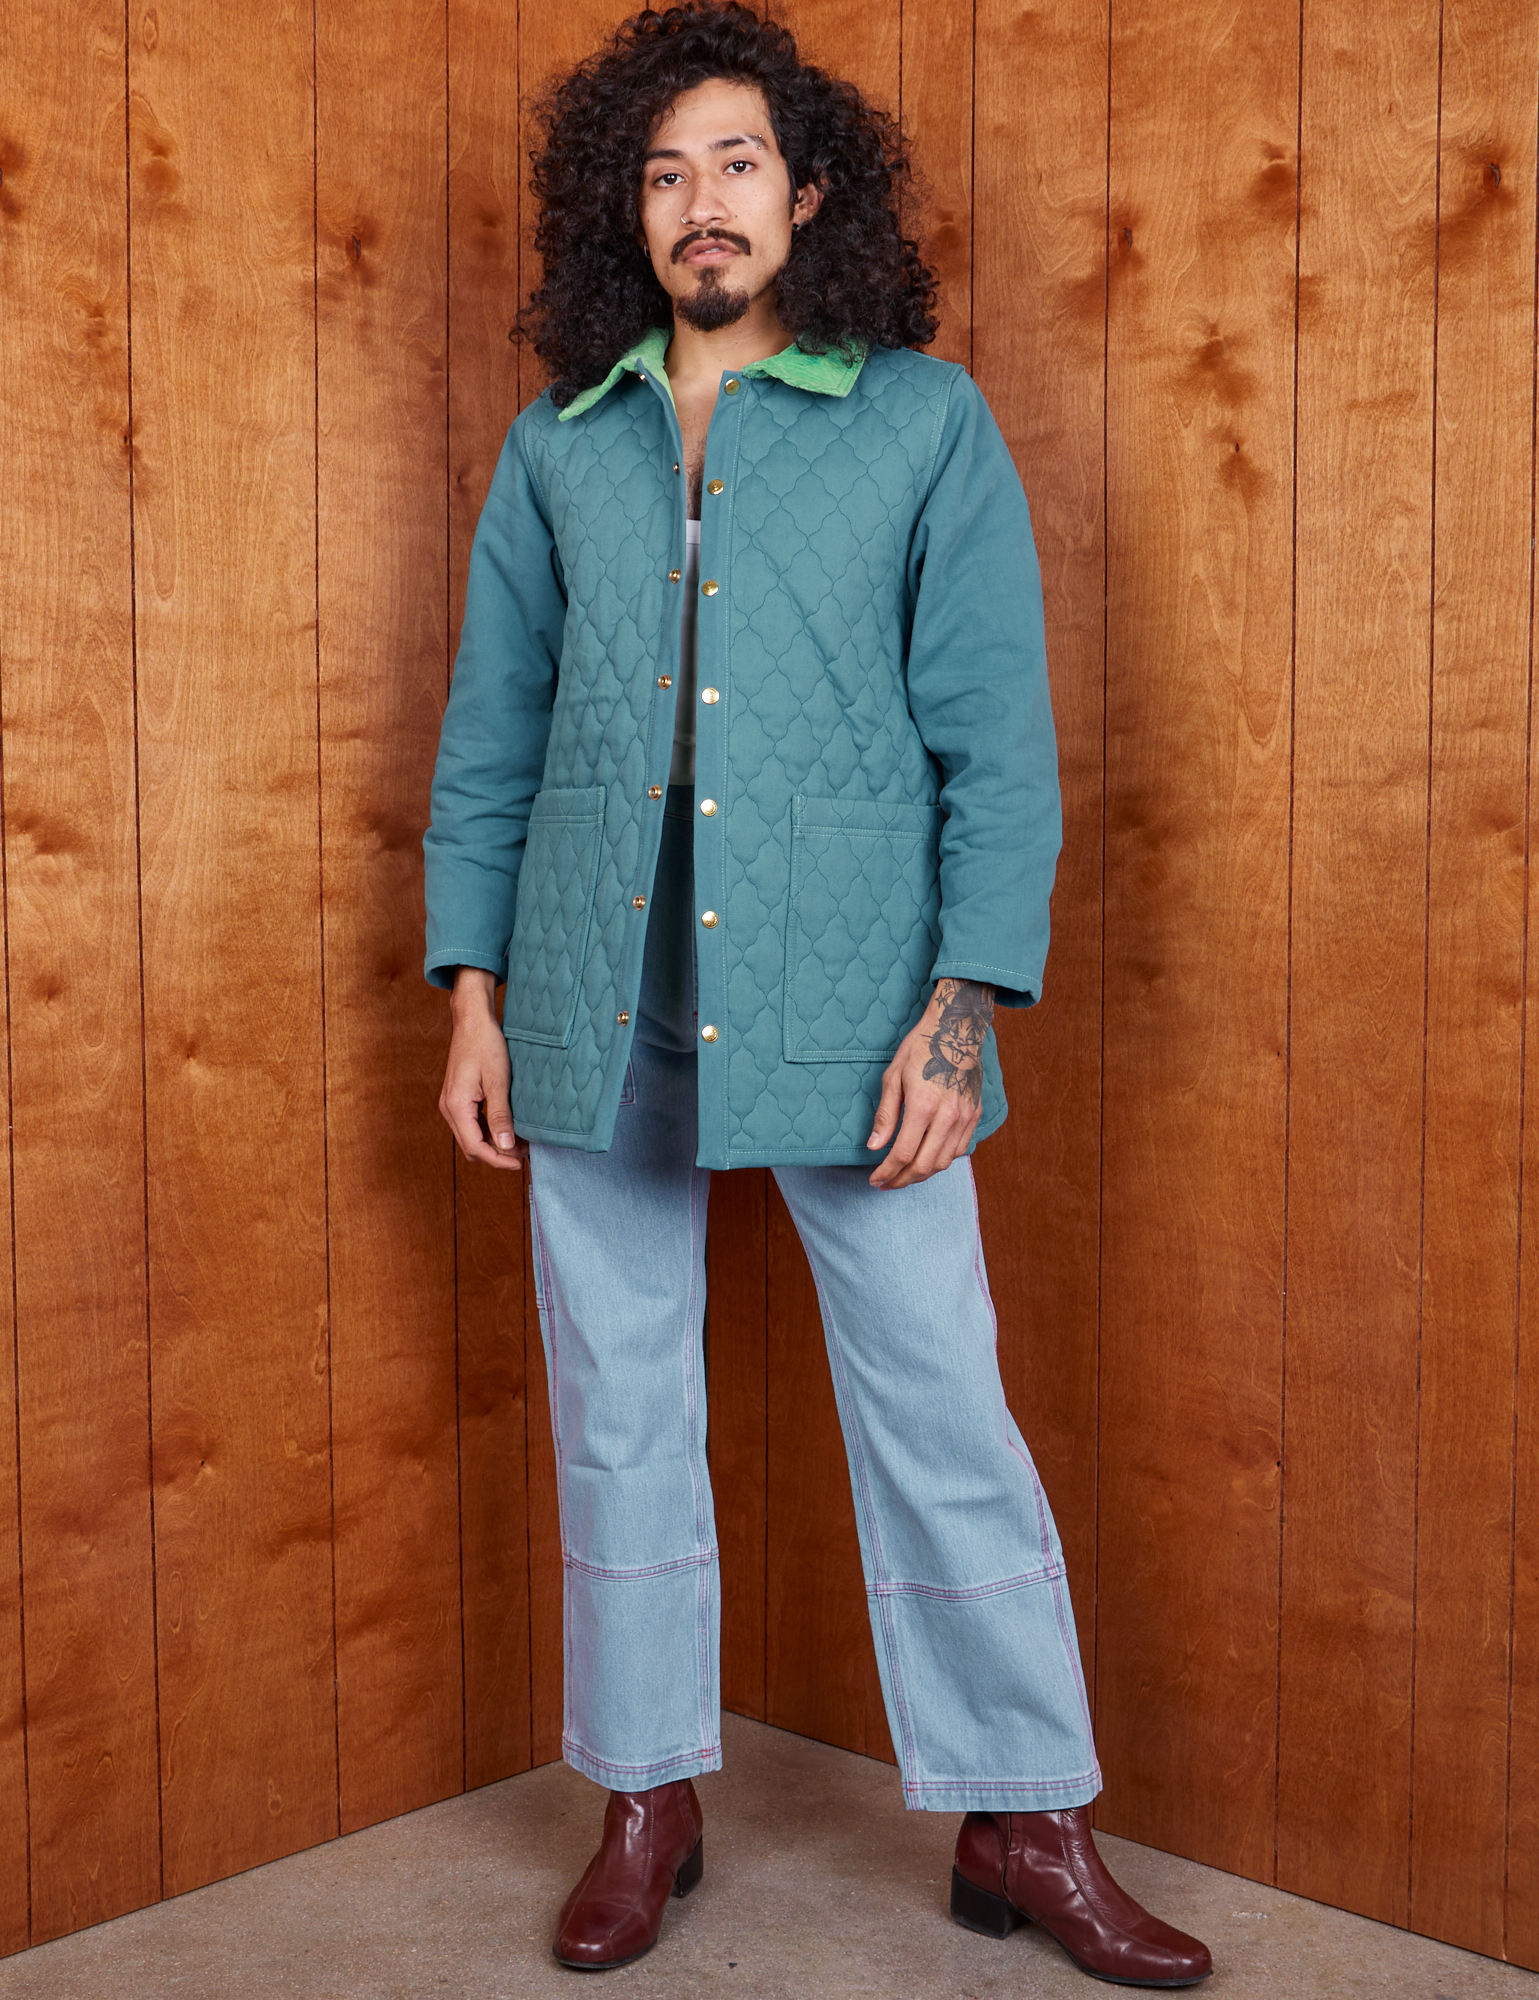 Jesse is wearing Quilted Overcoat in Marine Blue and light wash Carpenter Jeans